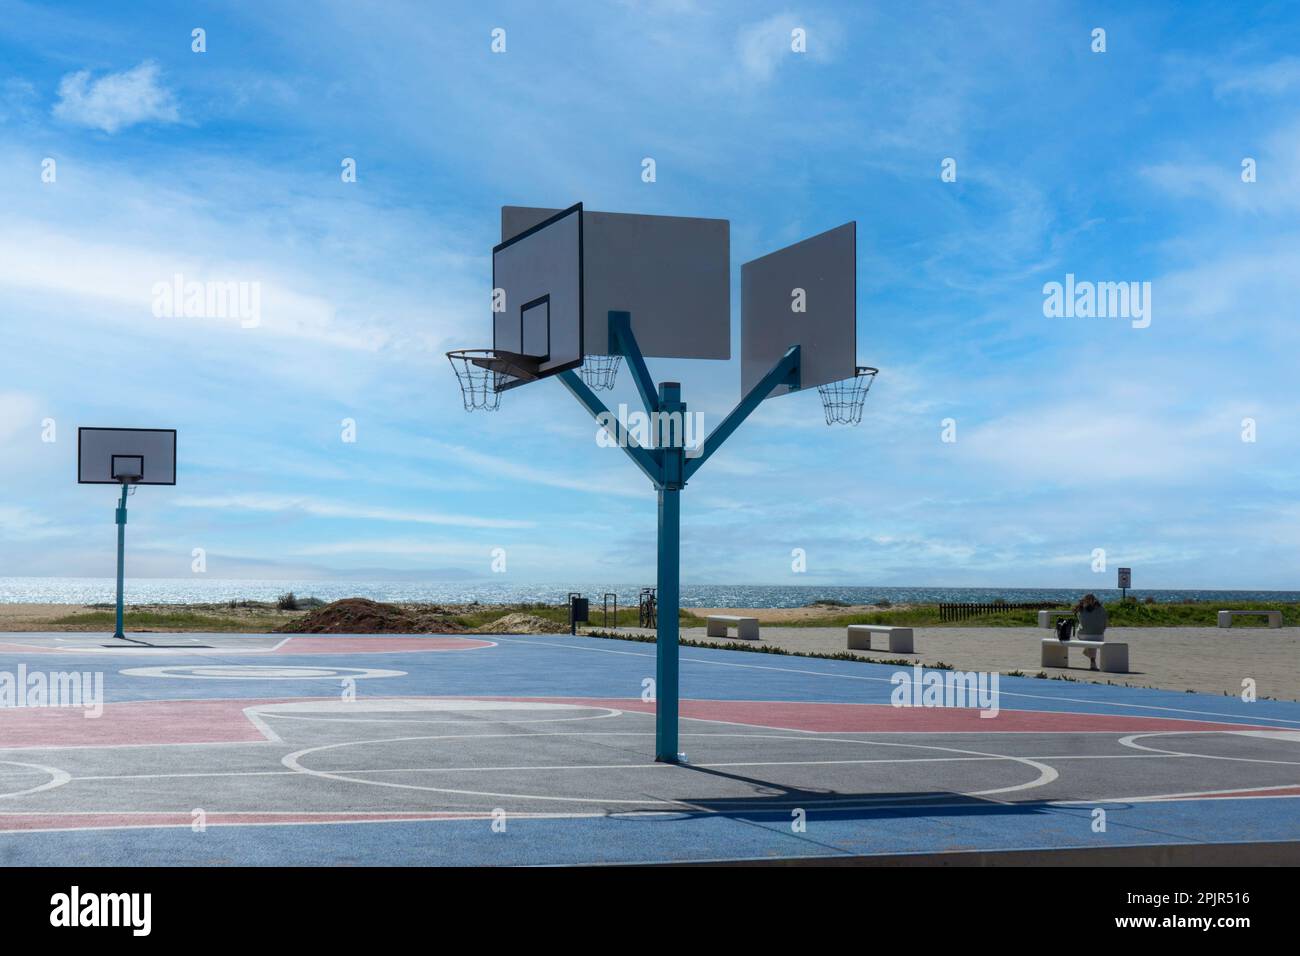 An outdoor basketball court beside the beach and seafront in Vilamoura, Portugal. Stock Photo